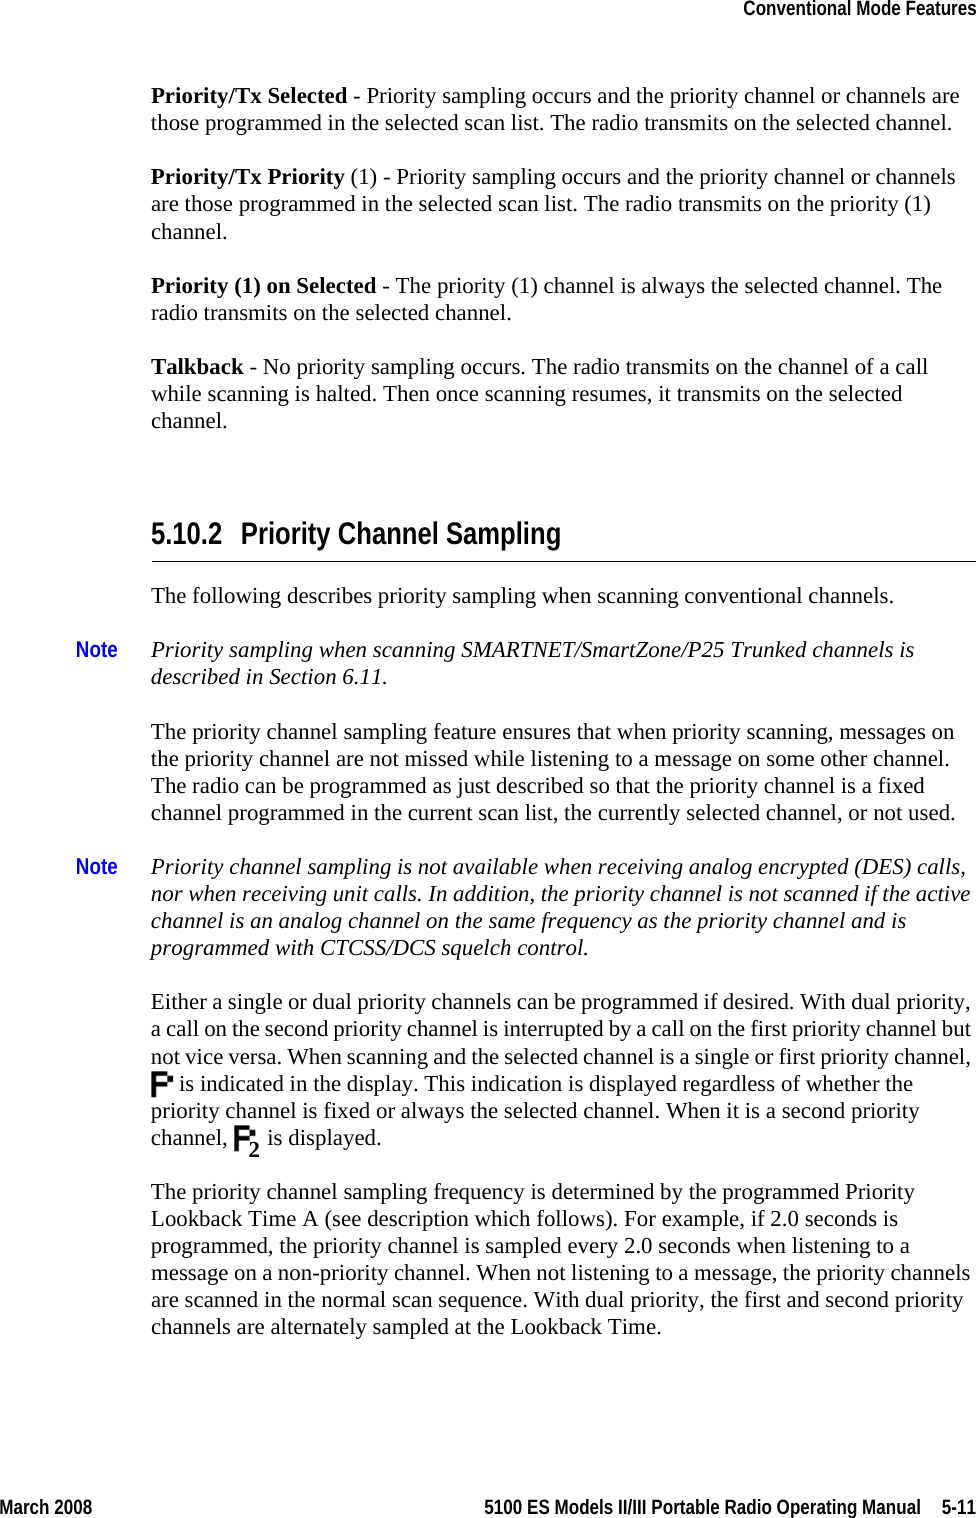 March 2008 5100 ES Models II/III Portable Radio Operating Manual  5-11Conventional Mode FeaturesPriority/Tx Selected - Priority sampling occurs and the priority channel or channels are those programmed in the selected scan list. The radio transmits on the selected channel.Priority/Tx Priority (1) - Priority sampling occurs and the priority channel or channels are those programmed in the selected scan list. The radio transmits on the priority (1) channel.Priority (1) on Selected - The priority (1) channel is always the selected channel. The radio transmits on the selected channel.Talkback - No priority sampling occurs. The radio transmits on the channel of a call while scanning is halted. Then once scanning resumes, it transmits on the selected channel.5.10.2 Priority Channel SamplingThe following describes priority sampling when scanning conventional channels. Note Priority sampling when scanning SMARTNET/SmartZone/P25 Trunked channels is described in Section 6.11.The priority channel sampling feature ensures that when priority scanning, messages on the priority channel are not missed while listening to a message on some other channel. The radio can be programmed as just described so that the priority channel is a fixed channel programmed in the current scan list, the currently selected channel, or not used.Note Priority channel sampling is not available when receiving analog encrypted (DES) calls, nor when receiving unit calls. In addition, the priority channel is not scanned if the active channel is an analog channel on the same frequency as the priority channel and is programmed with CTCSS/DCS squelch control.Either a single or dual priority channels can be programmed if desired. With dual priority, a call on the second priority channel is interrupted by a call on the first priority channel but not vice versa. When scanning and the selected channel is a single or first priority channel,  is indicated in the display. This indication is displayed regardless of whether the priority channel is fixed or always the selected channel. When it is a second priority channel,   is displayed.The priority channel sampling frequency is determined by the programmed Priority Lookback Time A (see description which follows). For example, if 2.0 seconds is programmed, the priority channel is sampled every 2.0 seconds when listening to a message on a non-priority channel. When not listening to a message, the priority channels are scanned in the normal scan sequence. With dual priority, the first and second priority channels are alternately sampled at the Lookback Time.2